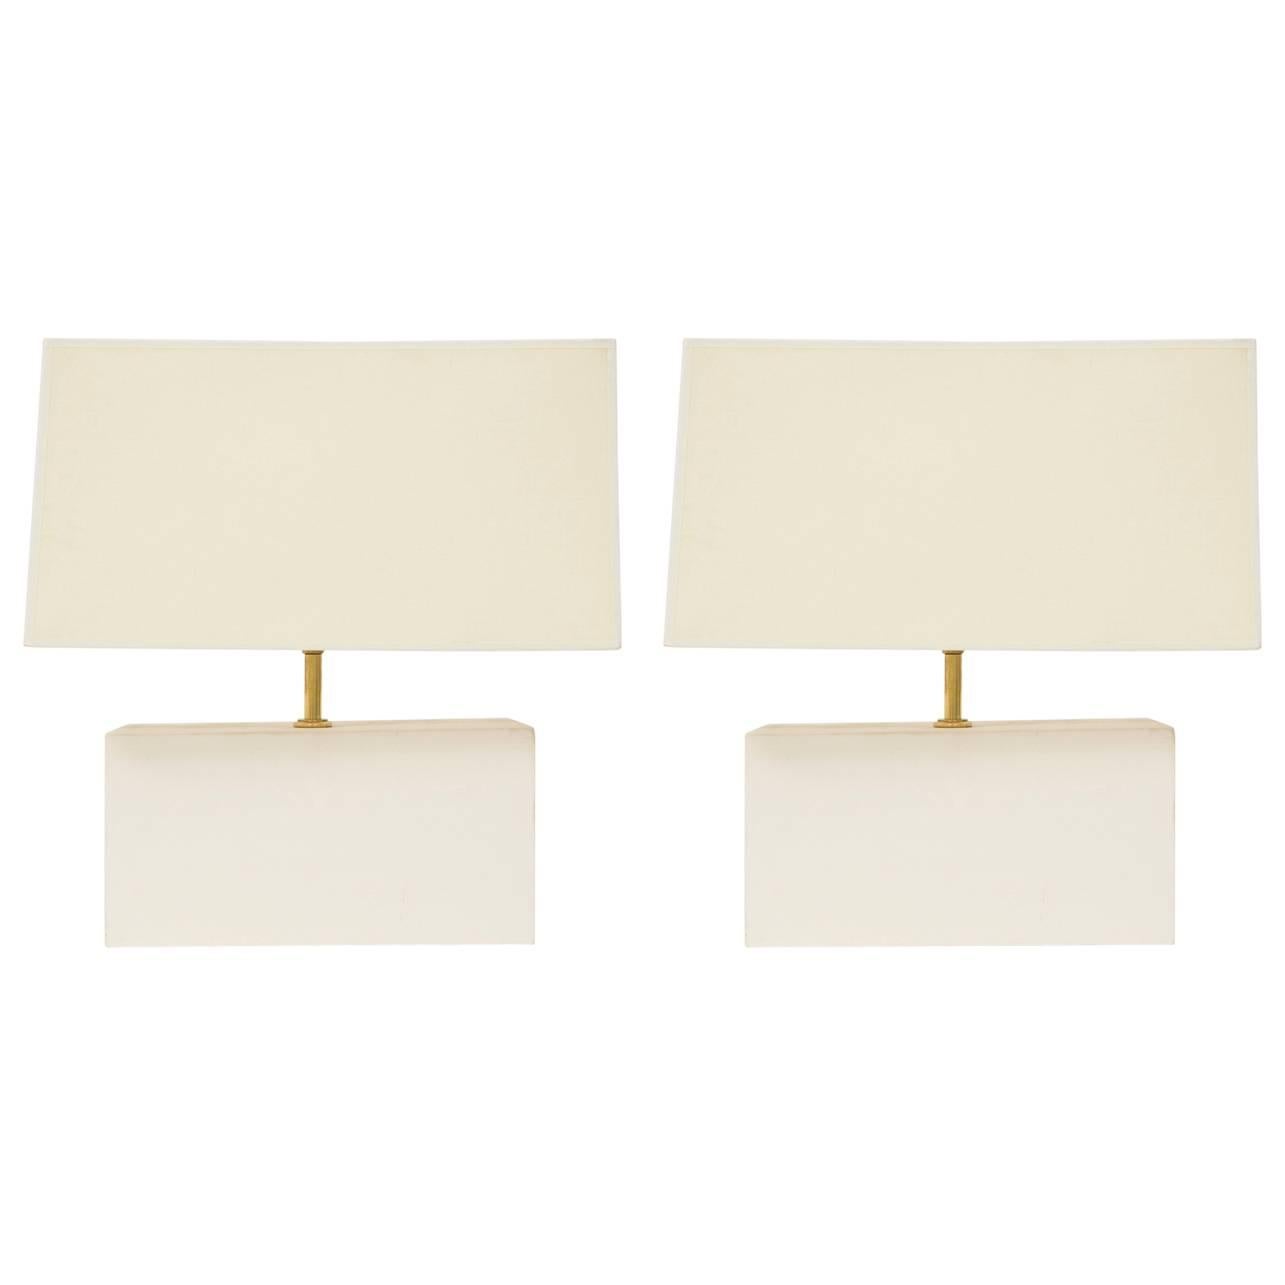 Desvres Manufacture, Pair of Rectangular Lamps in Plaster, France, circa 1950 For Sale